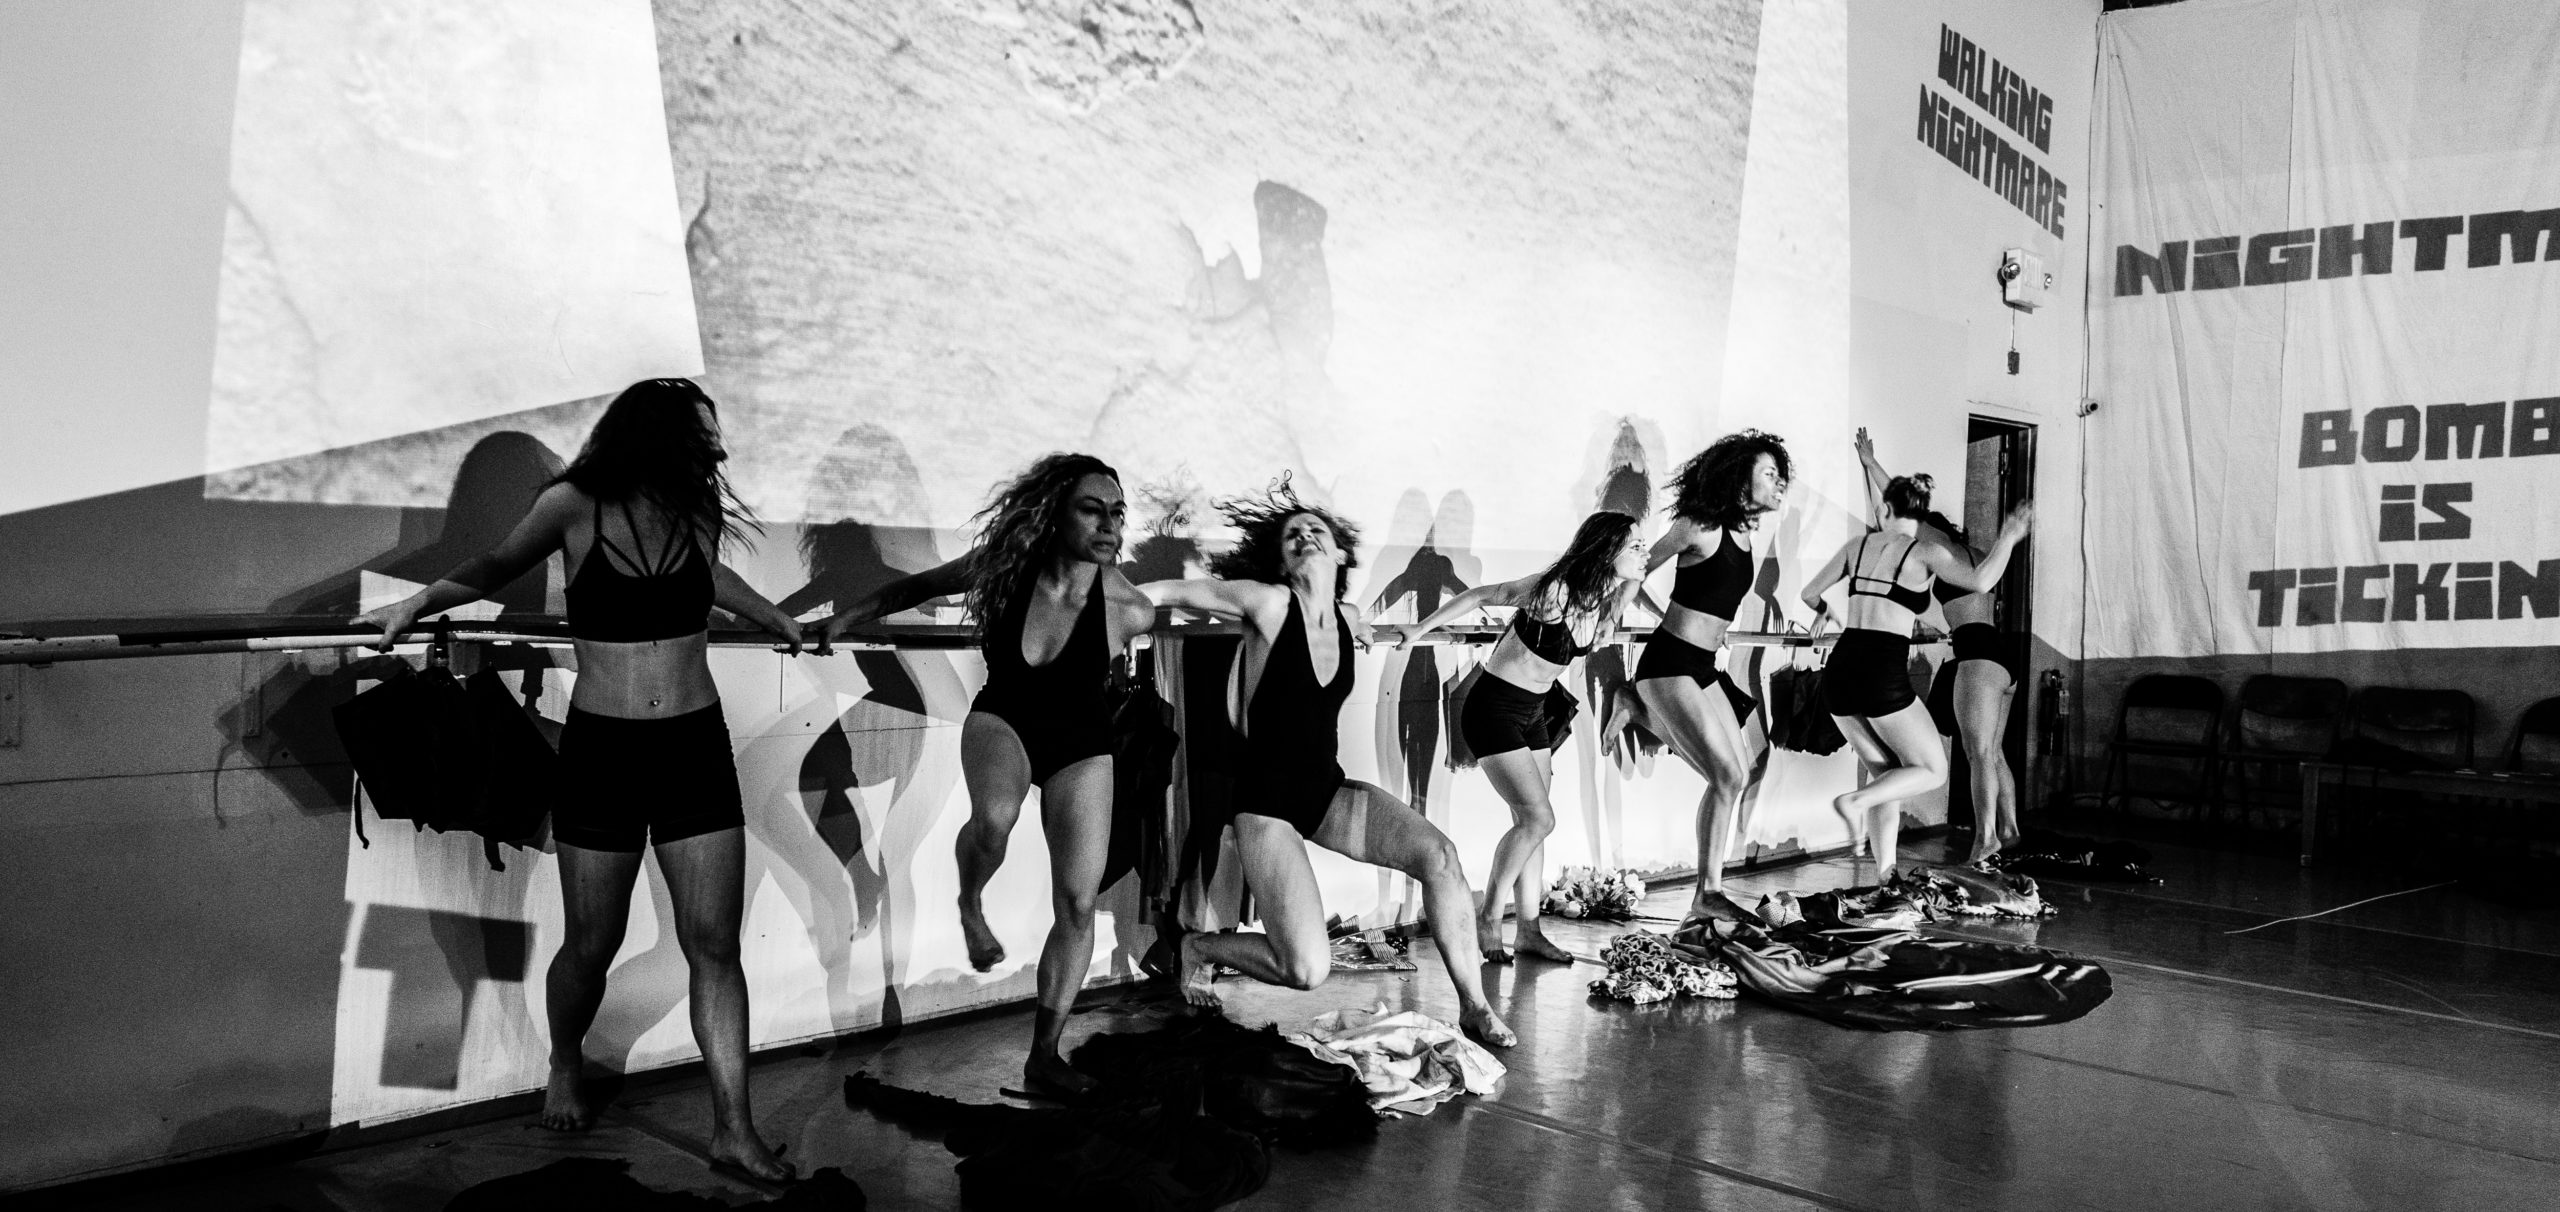 Black and white image of women lined up against a ballet bar